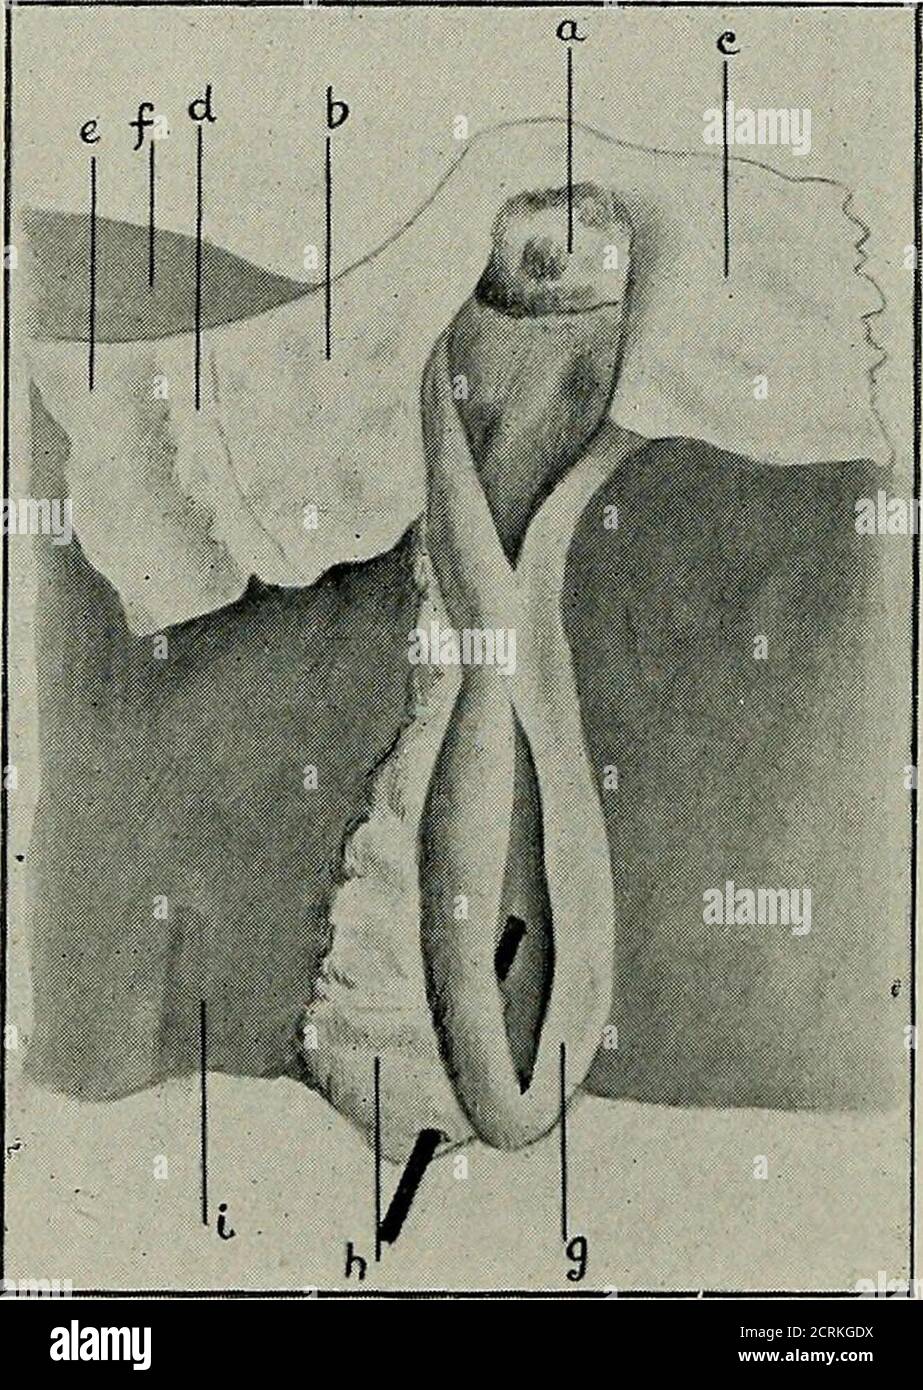 . Diseases of the gall-bladder and bile-ducts, including gall-stones . he cystic duct. Situated atthe junction of the cystic, hepatic, and common bile-ducts,was a growth about the size of a filbert, which was found,when the ducts were opened, to completely occlude them(see Fig. 41). There were no adhesions in the neighbourhood, nor werethere any secondary growths to be found. The stomachshowed no evidences of ulceration, but there were slightsigns of cirrhosis of the liver. There was no peritonitis. Cancer of the ampulla of Vater was probably first described 10—2 148 DISEASES OF THE GALL-BLADD Stock Photo